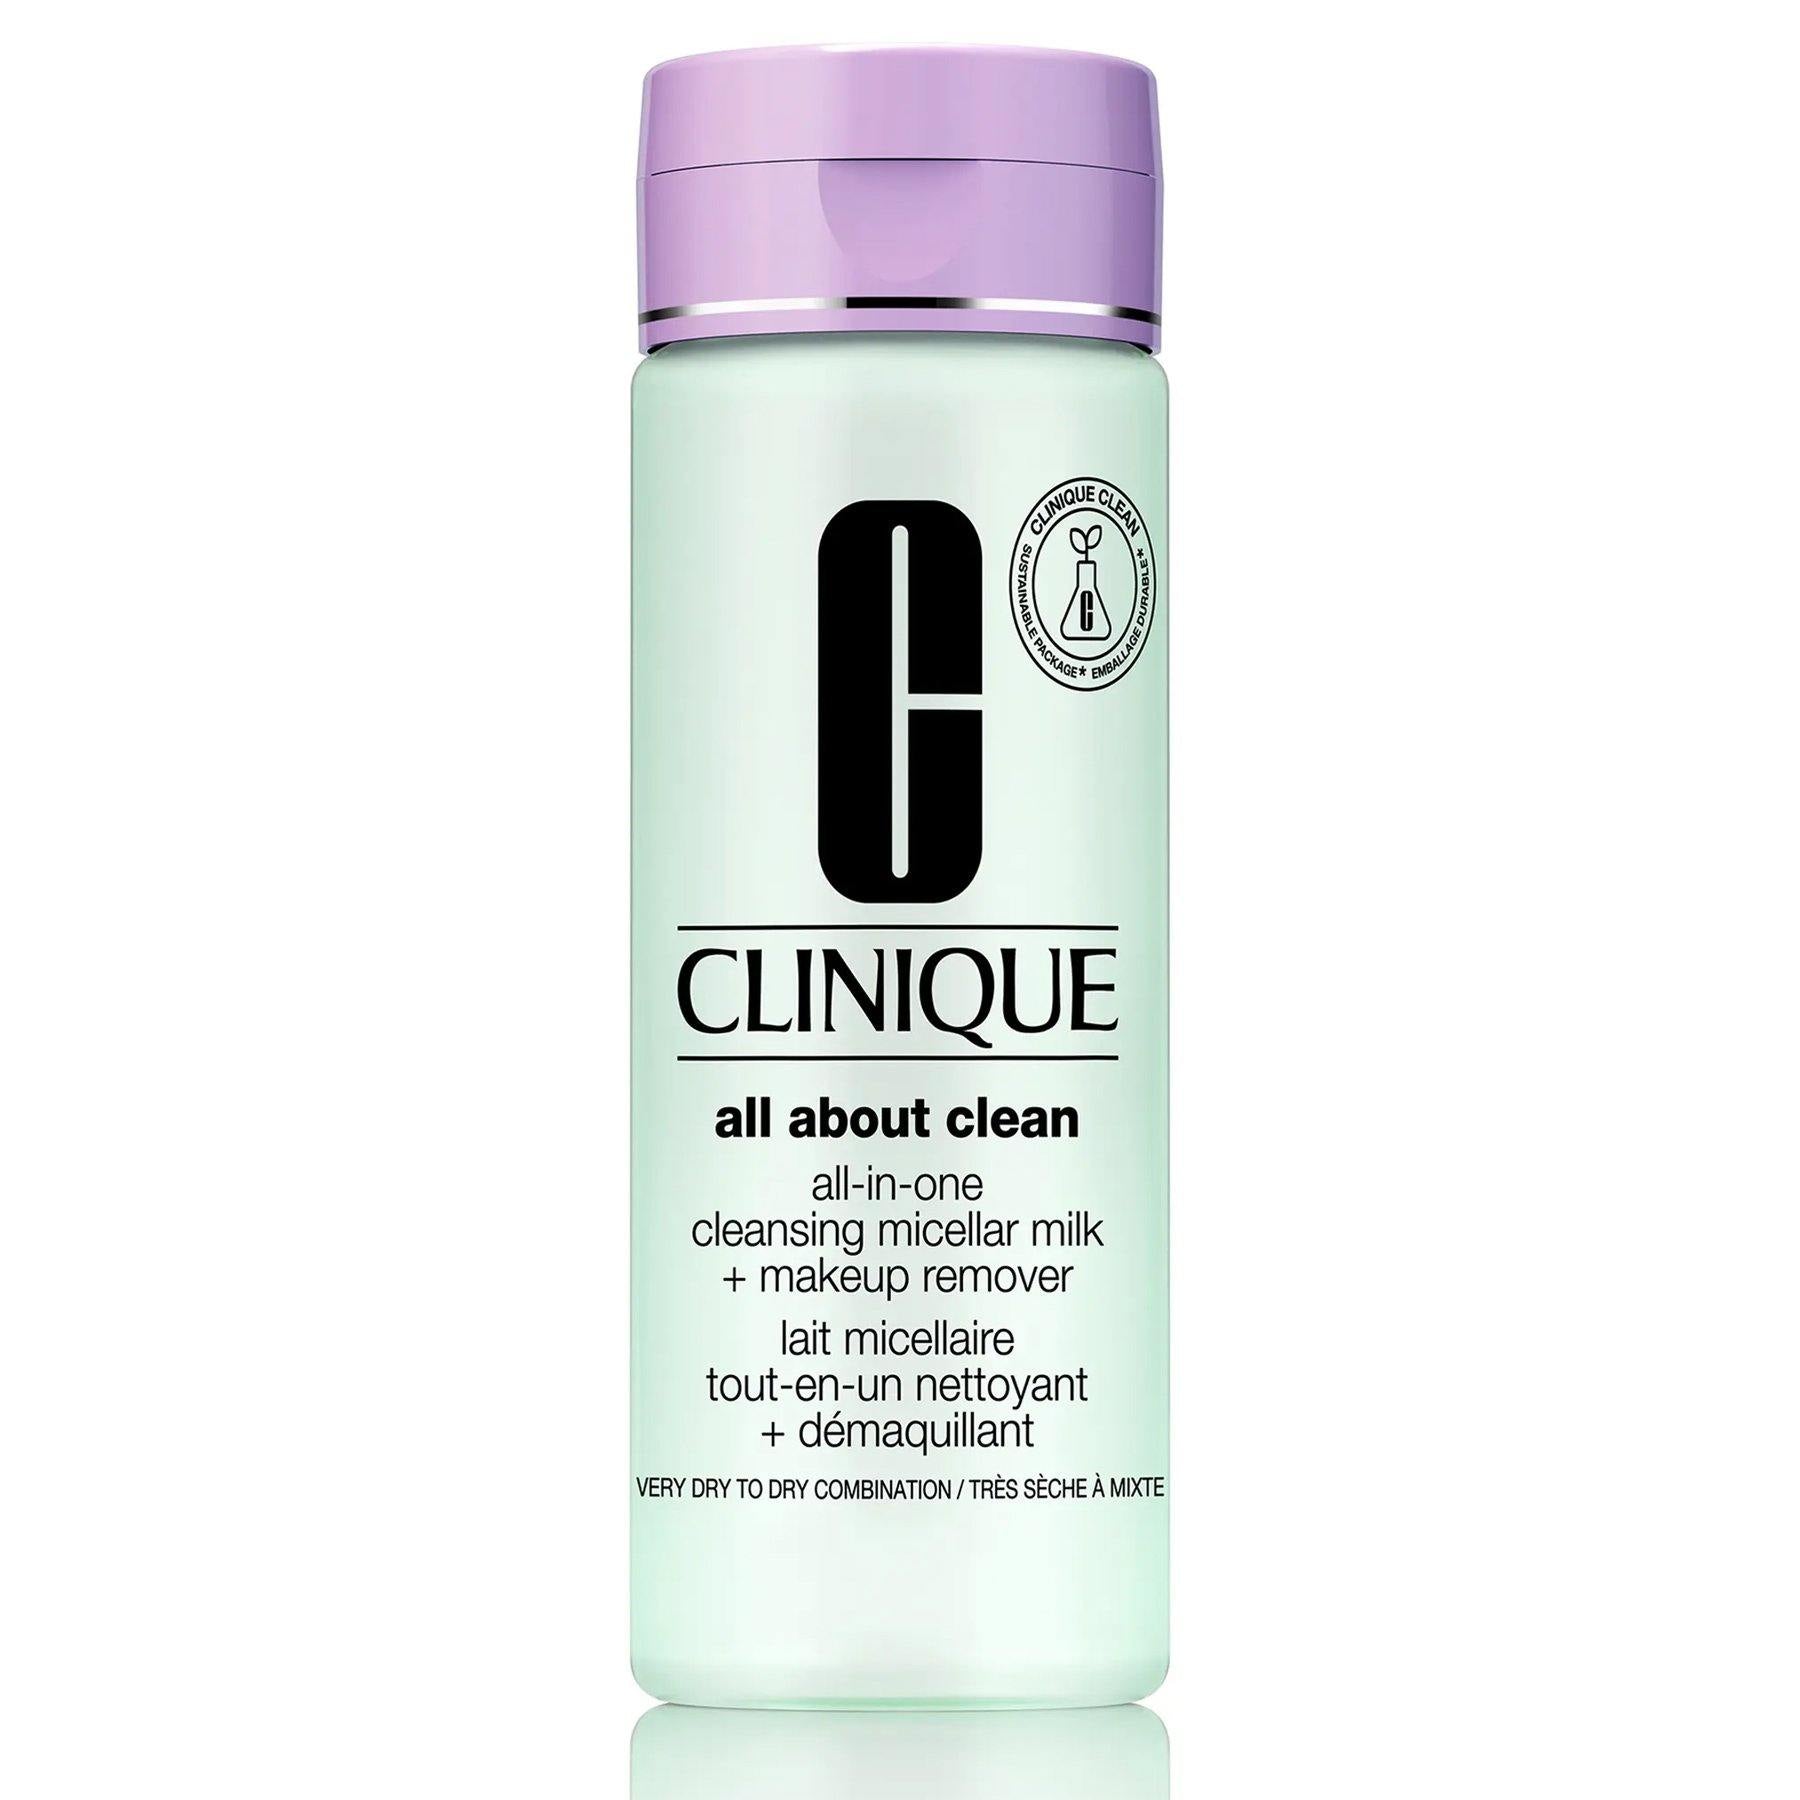 All About Clean All-In-One Cleansing Micellar Milk + Makeup Remover 6.7 oz - Cosmos Boutique New Jersey